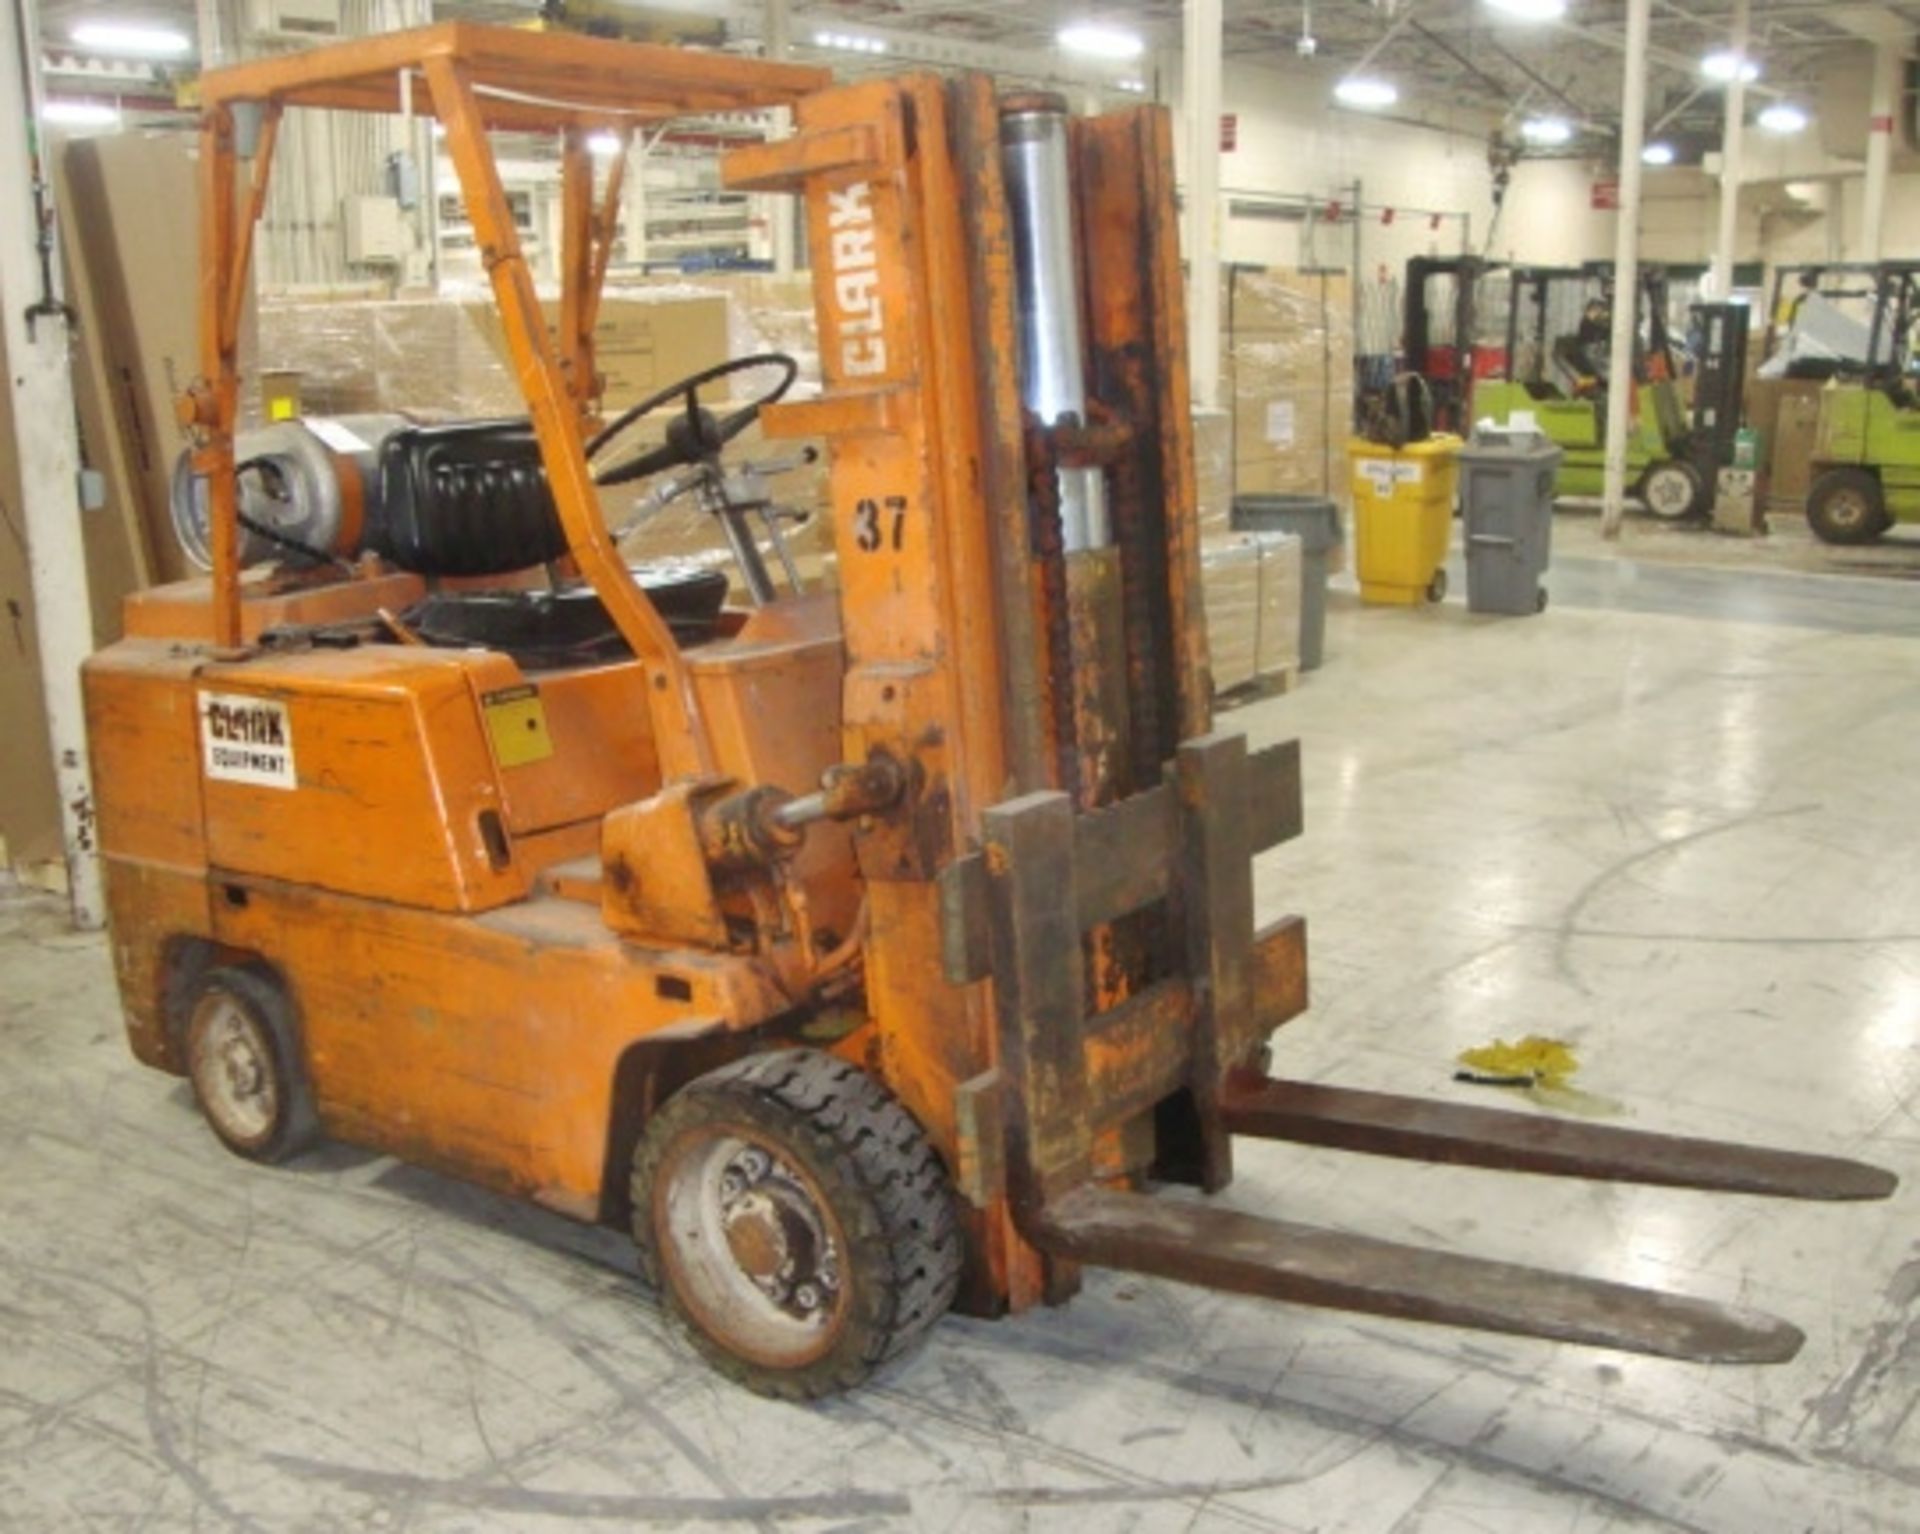 Clark C500-80 Forklift, 8,000lb lift, 42" forks, runs & operates Note-Propane tank Not included